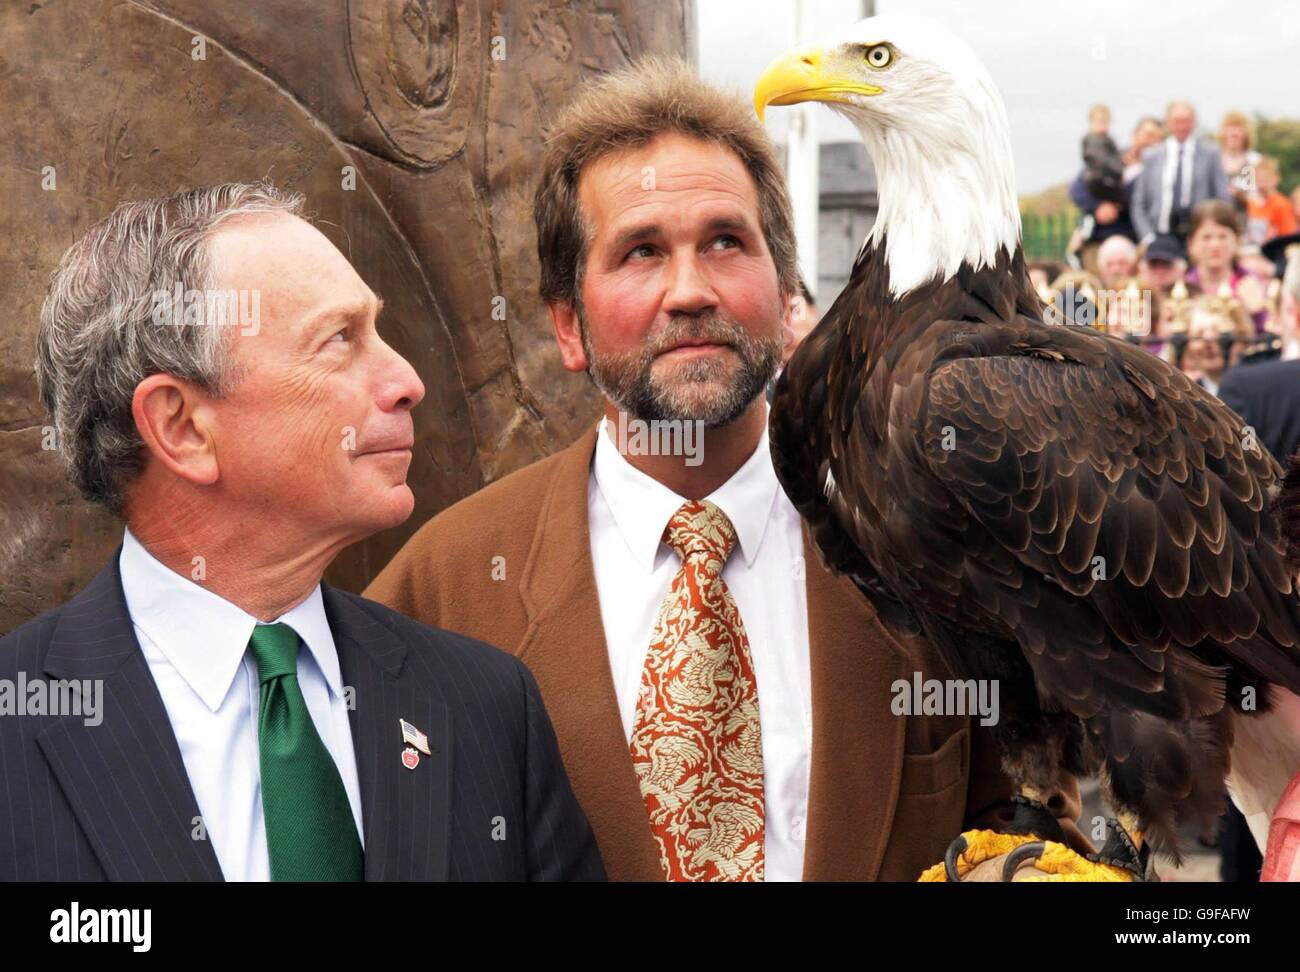 New York's Mayor Michael Bloomberg (left) meets a Bald Eagle and its unnamed handler (centre) during the unveiling of a monument to the Fighting 69th Regiment in Ballymote, County Sligo, today. Stock Photo